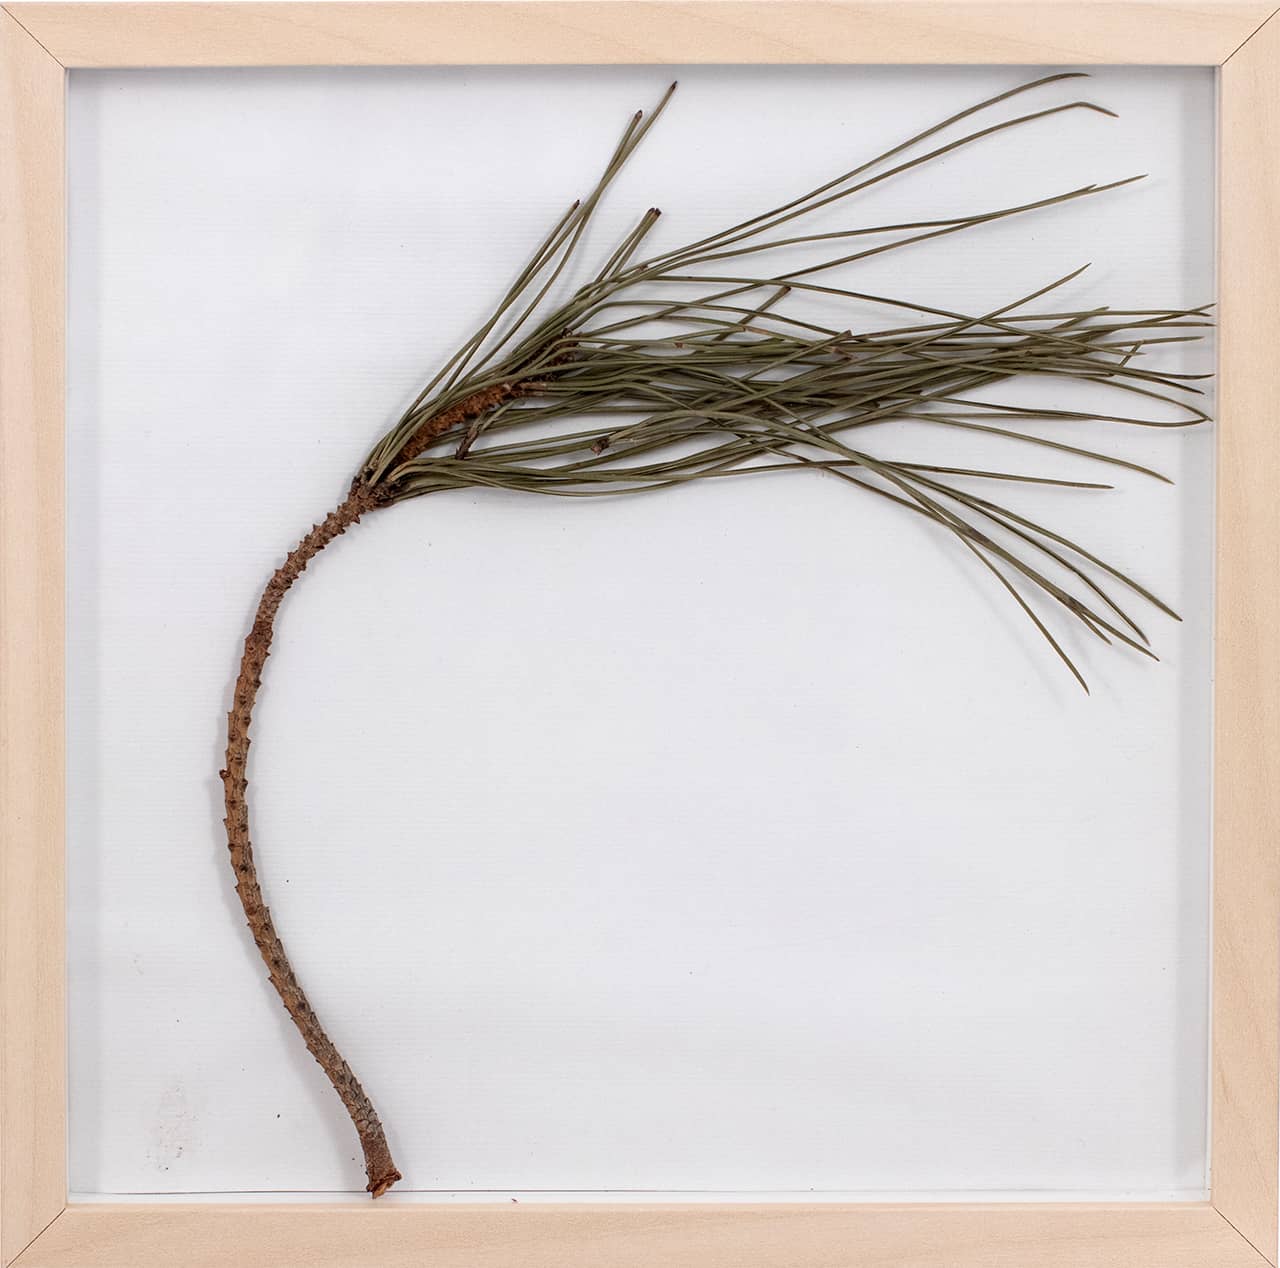 'Pinus Pinea', assemblage (pine branch and natural pigment on paper, framed). Artwork by Francesca Virginia Coppola